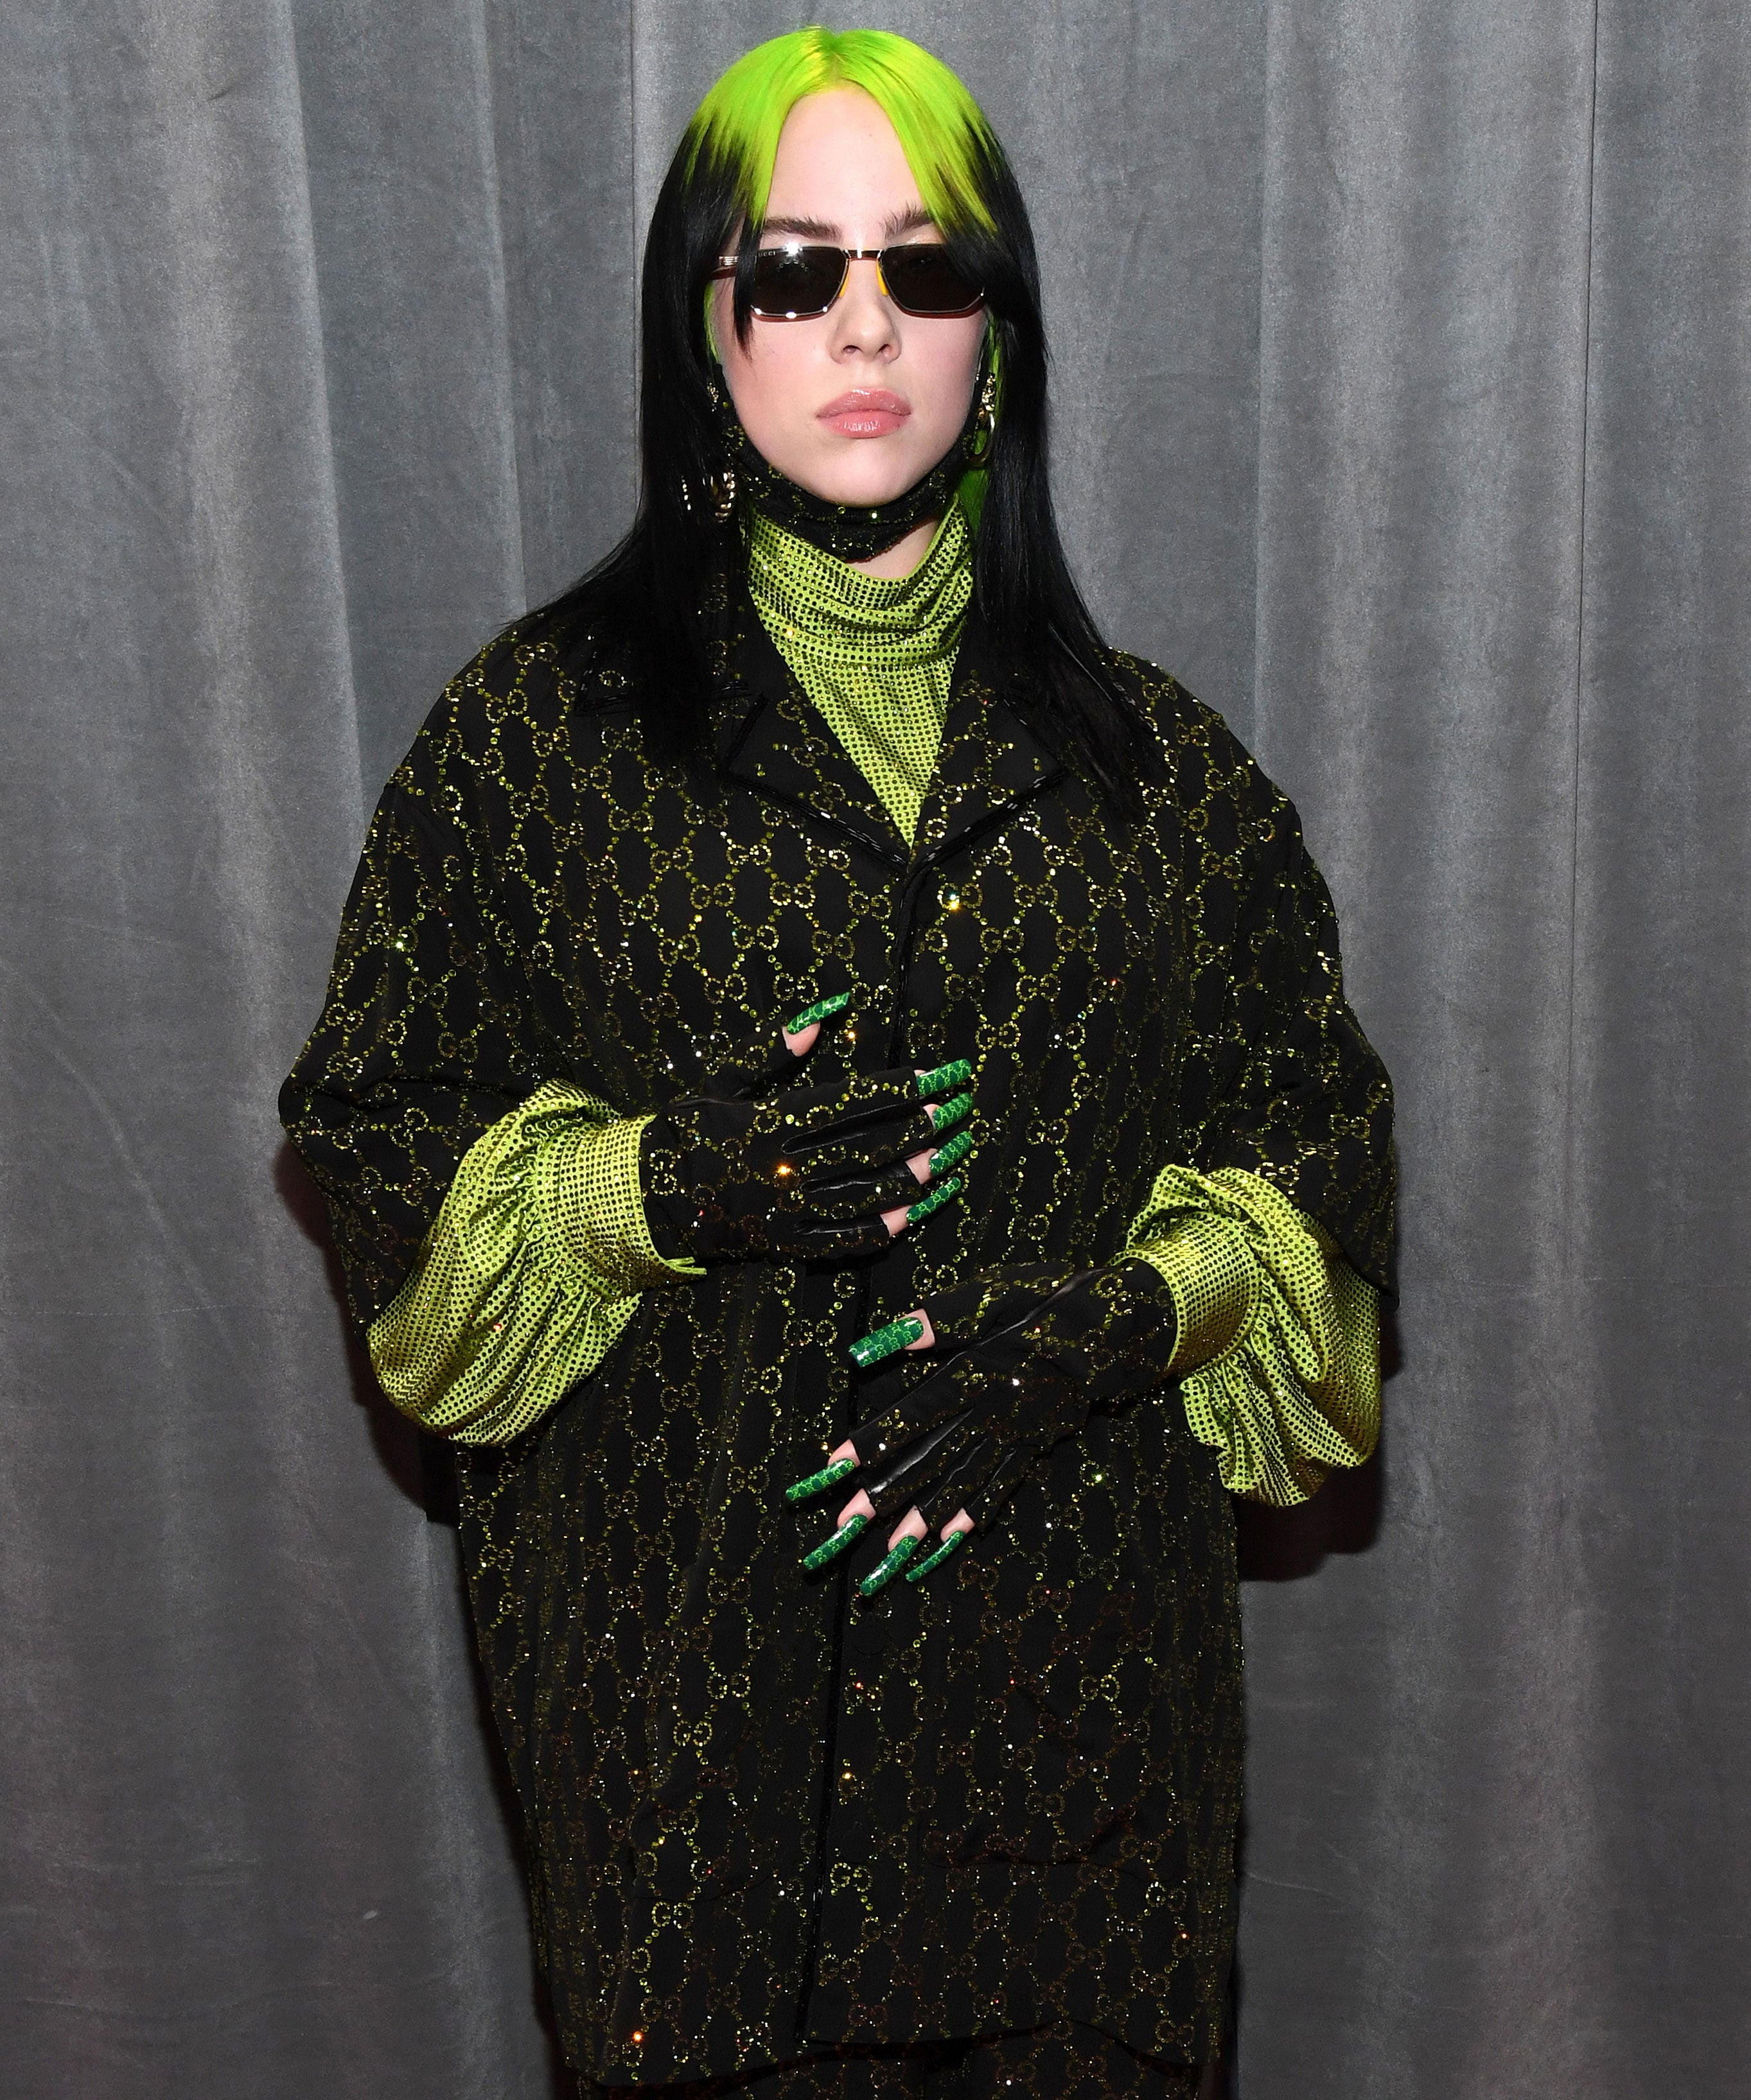 Billie Eilish Is A Slime-Green Gucci Queen At Grammys